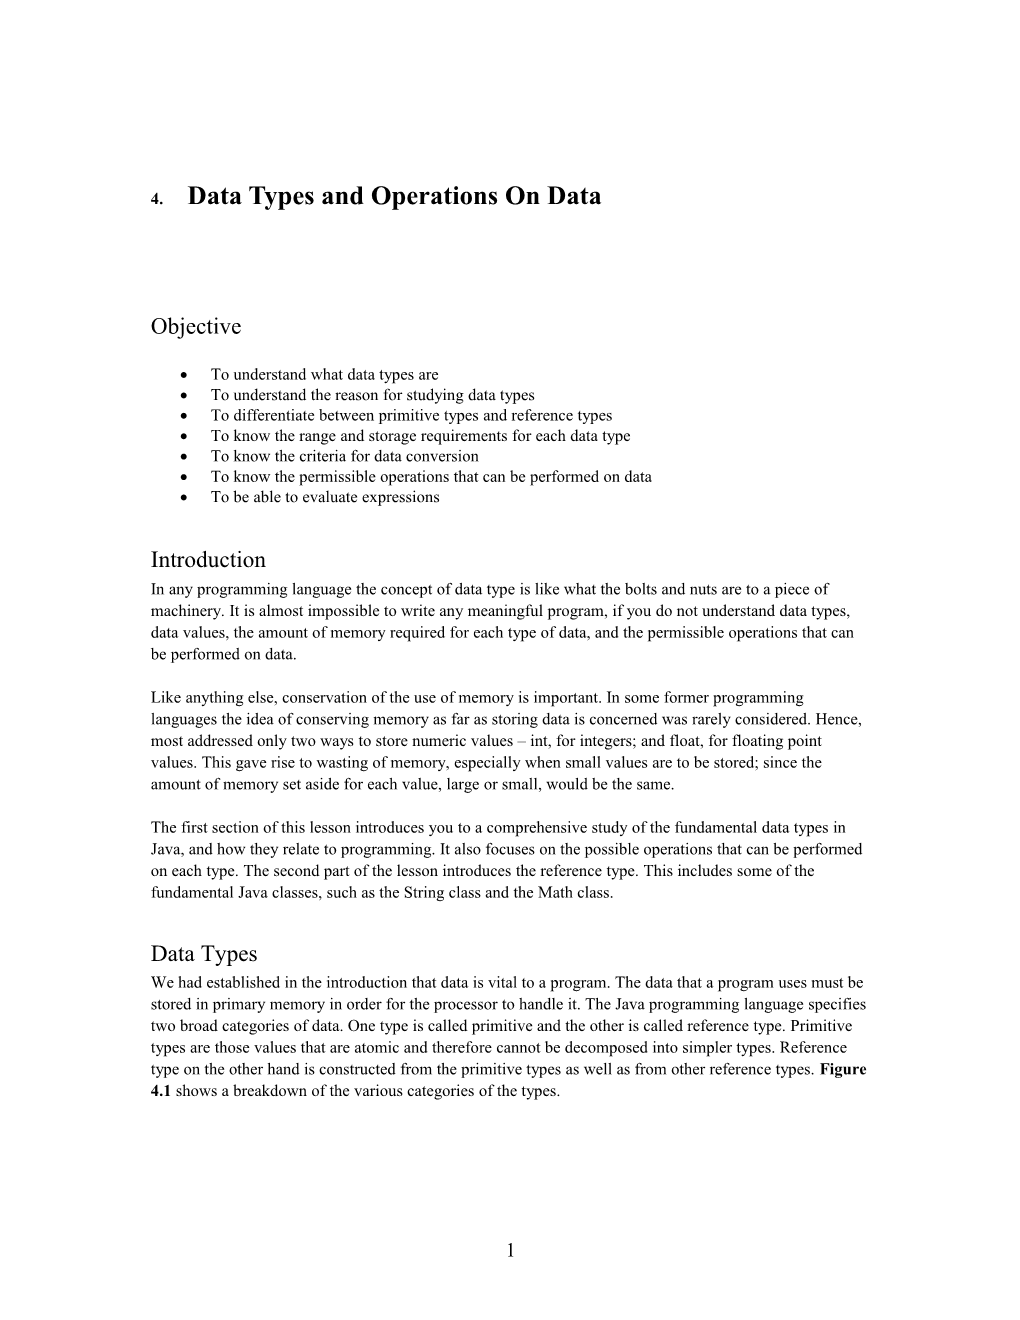 CHAPTER 3 Data Types and Operations on Data